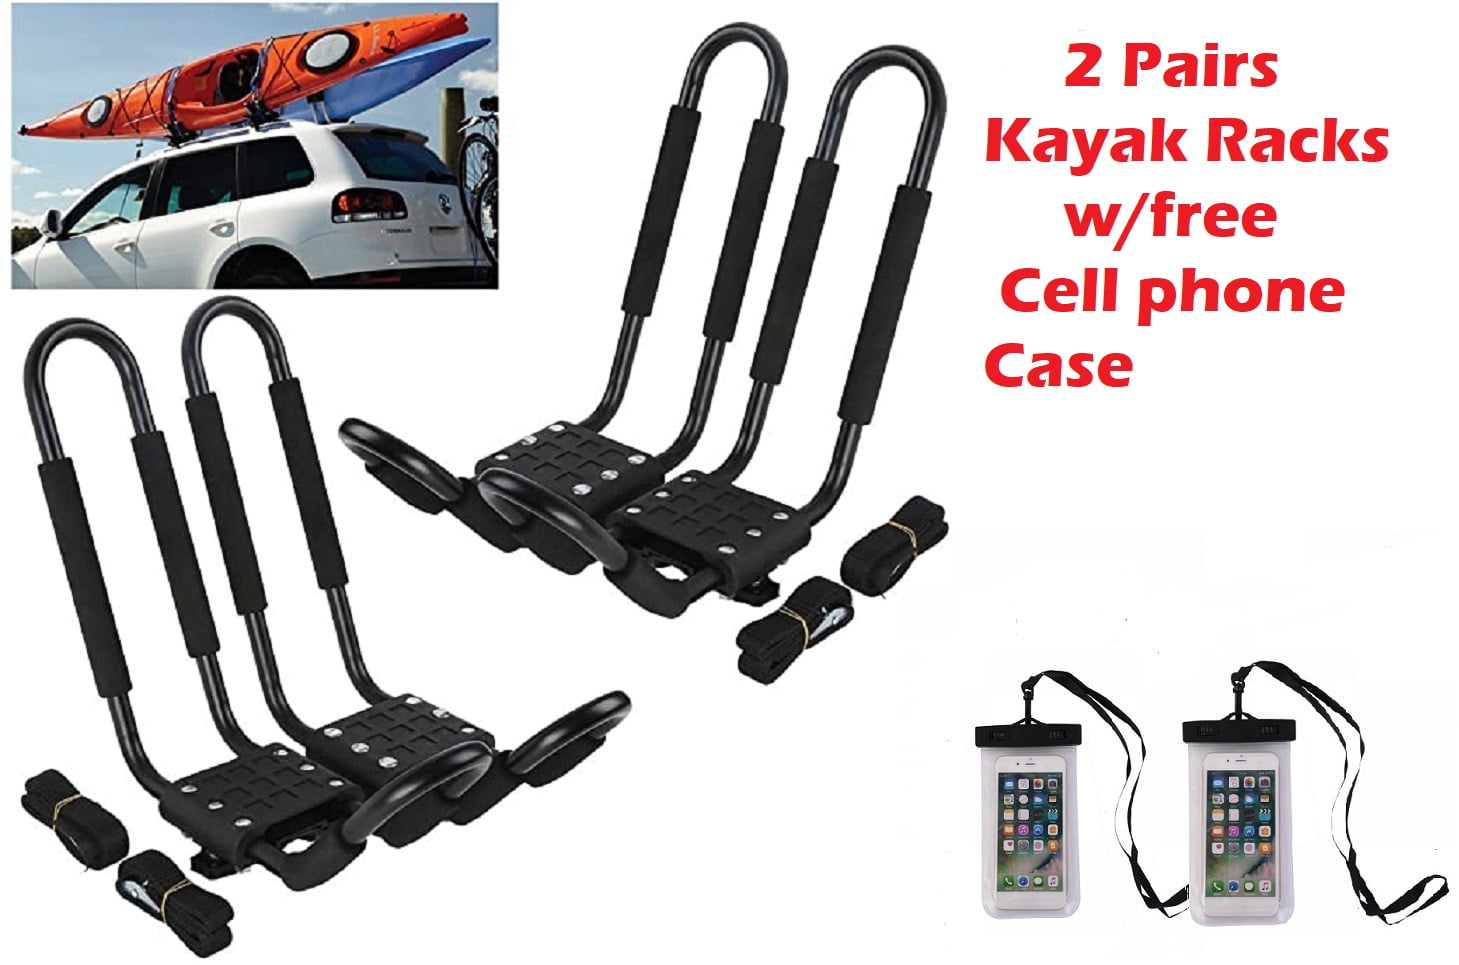 1 Pair Fixed Kayak Canoe Roof Rack Double Twin J Bars Carrier w/Straps 2-3Day 